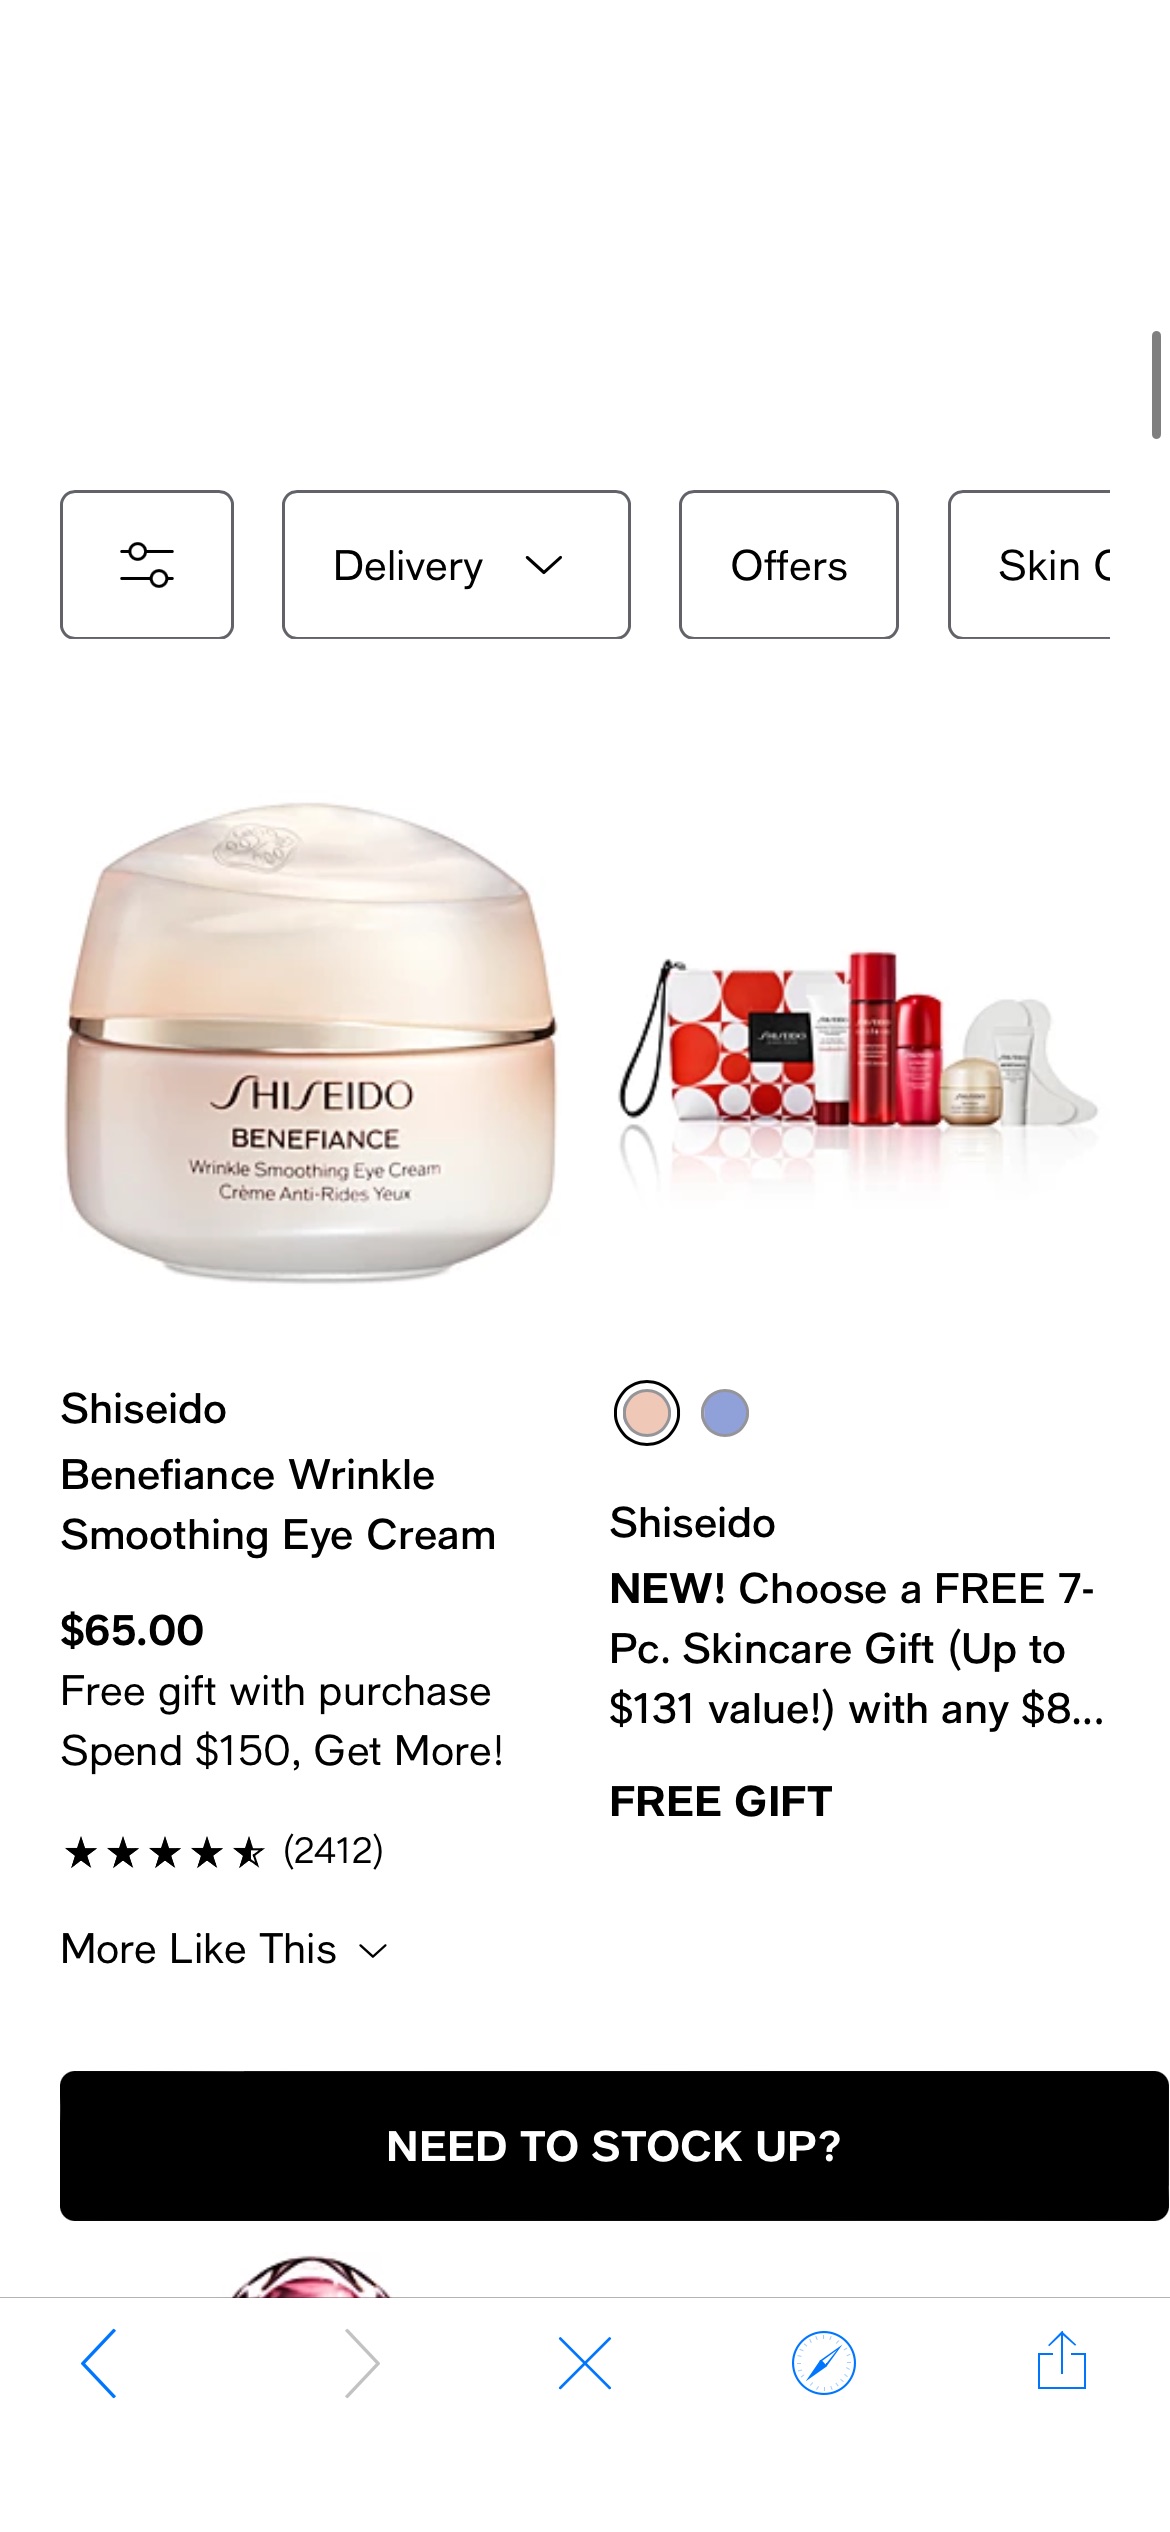 Free
7-pc. gift With any $85 Shiseido purchase, up to a $131 value. One per customer,
while supplies